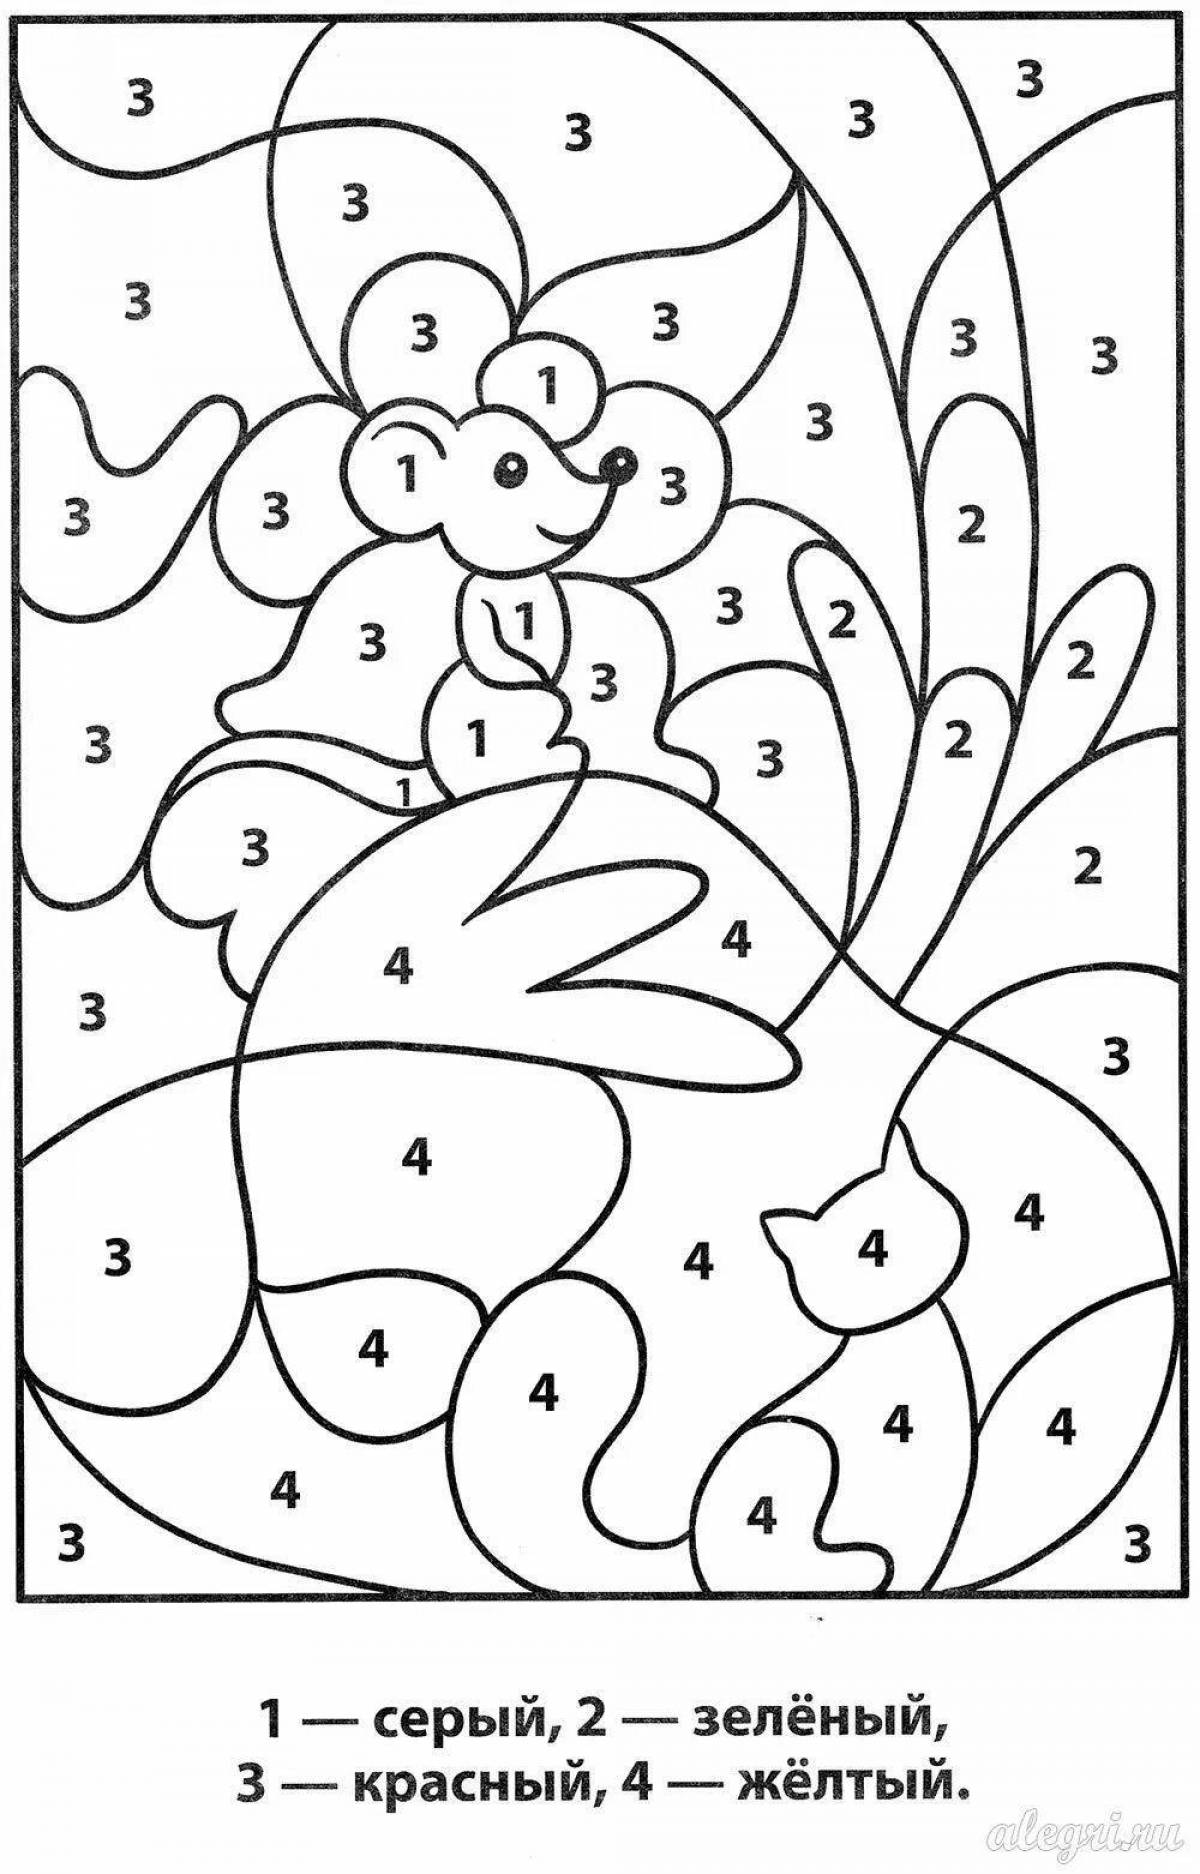 Fun coloring simple by numbers